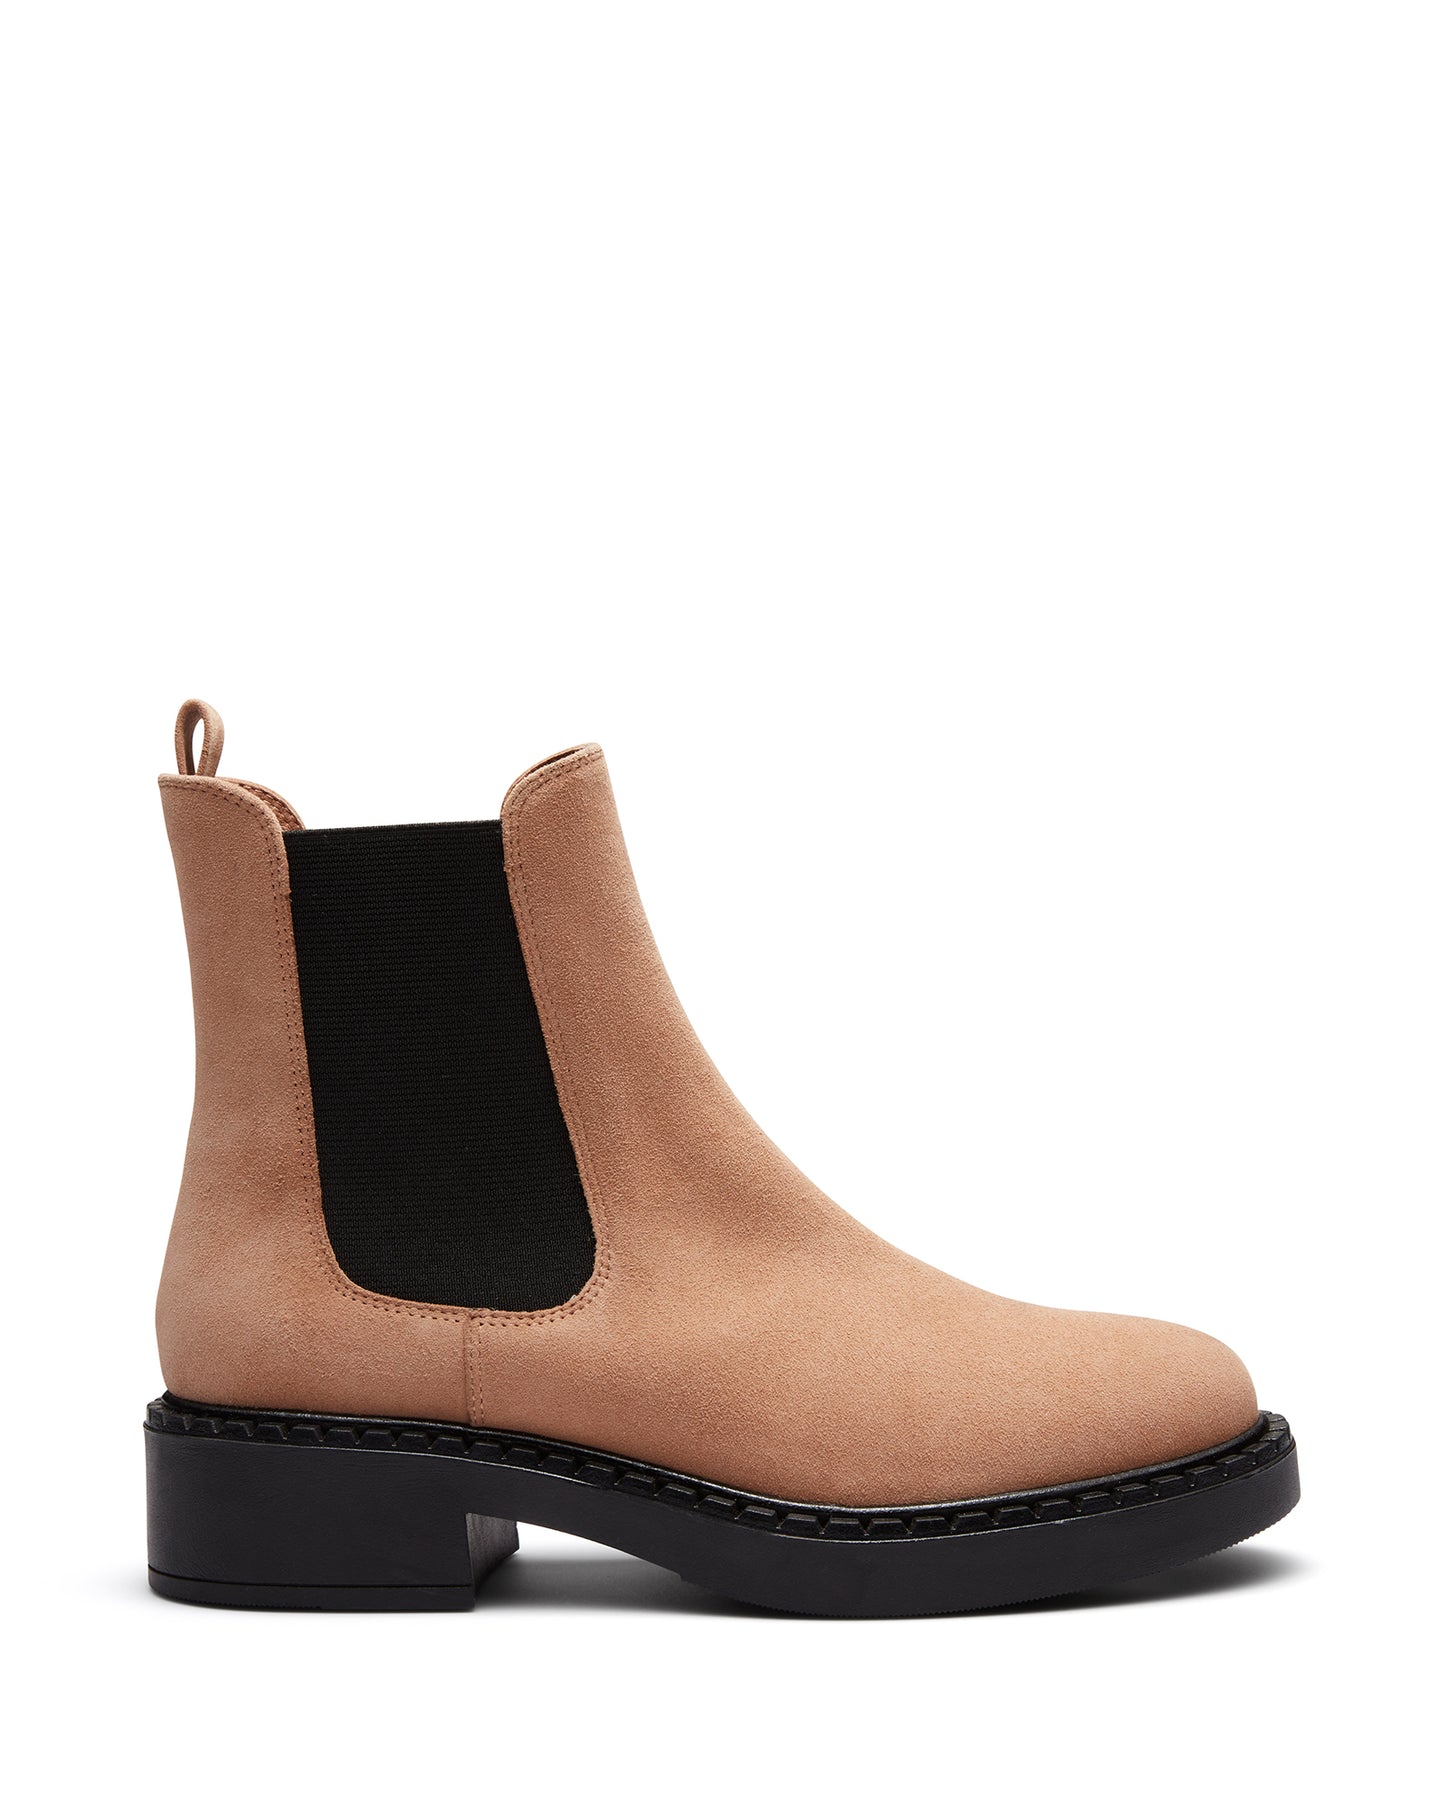 Just Because Shoes Arbury Coffee | Women's Leather Boot | Chelsea | Ankle